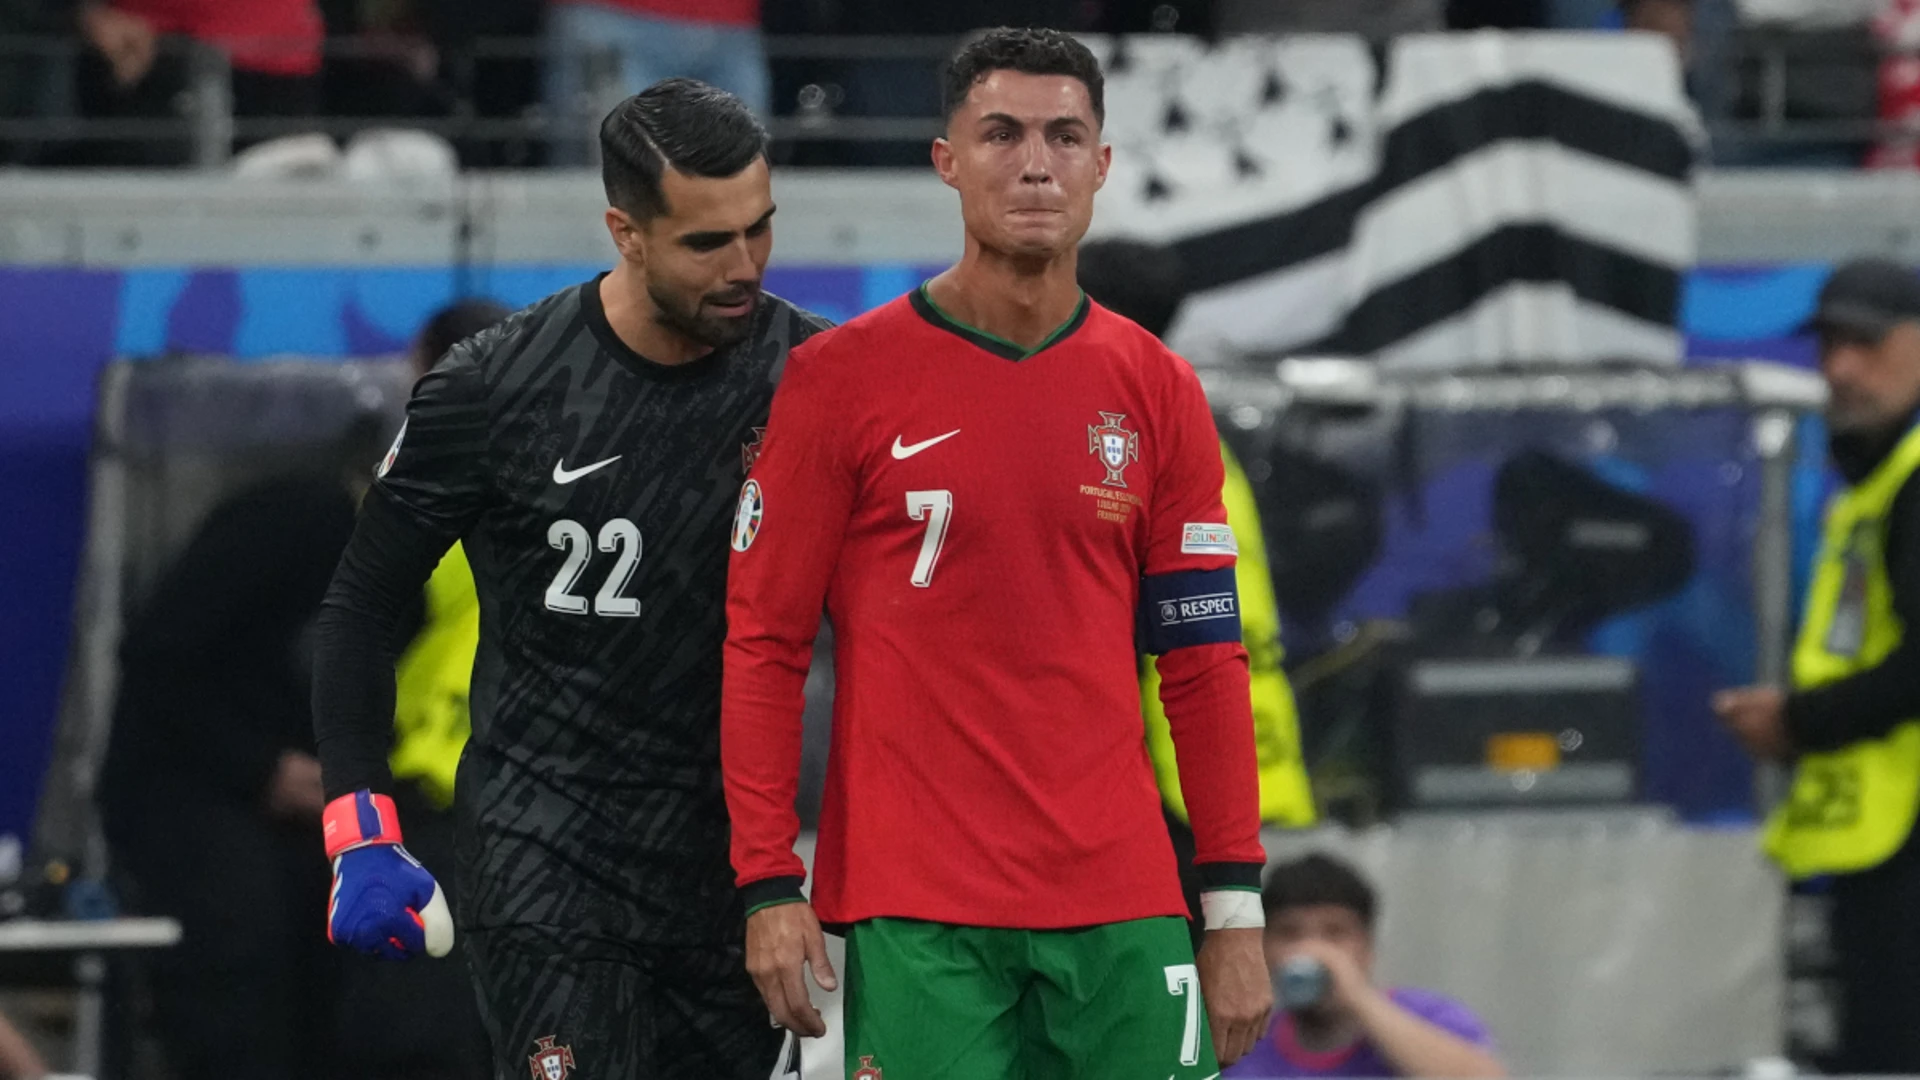 We're only human, Portugal's Silva says of Ronaldo's tears